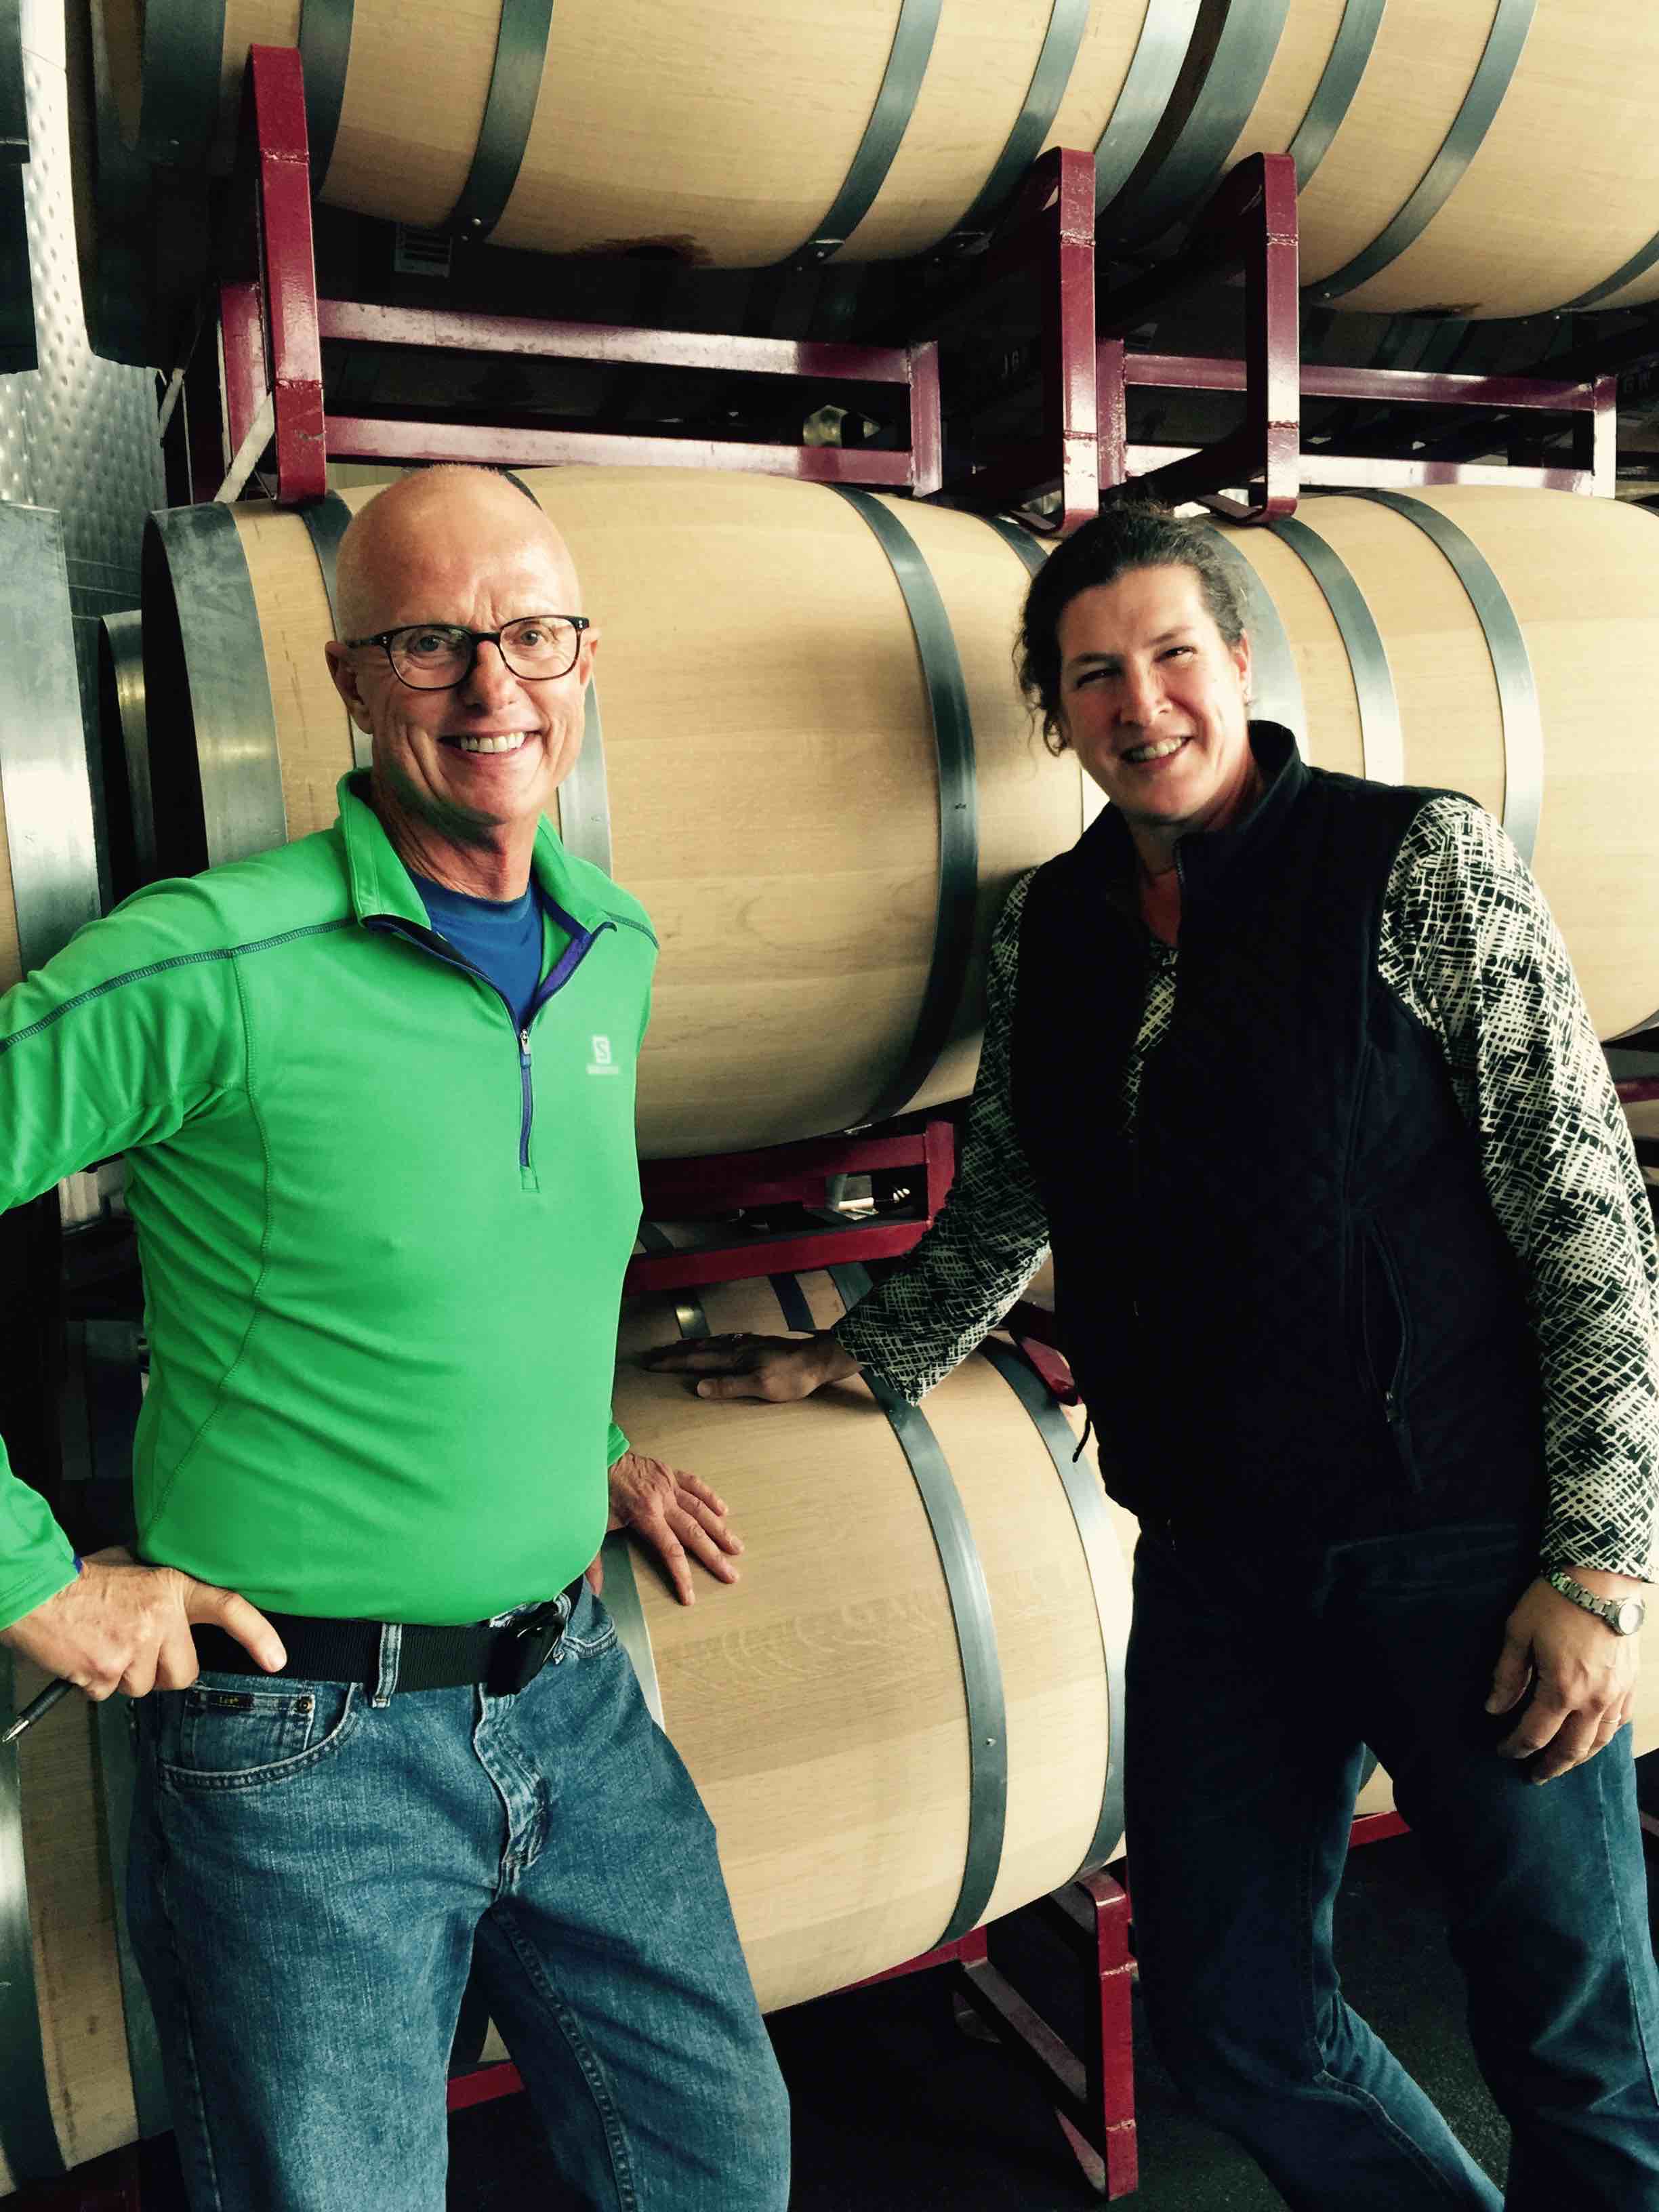 Lawer Estates wines are created by the experienced winemaking team of Cary Gott and Kelly Delanni.